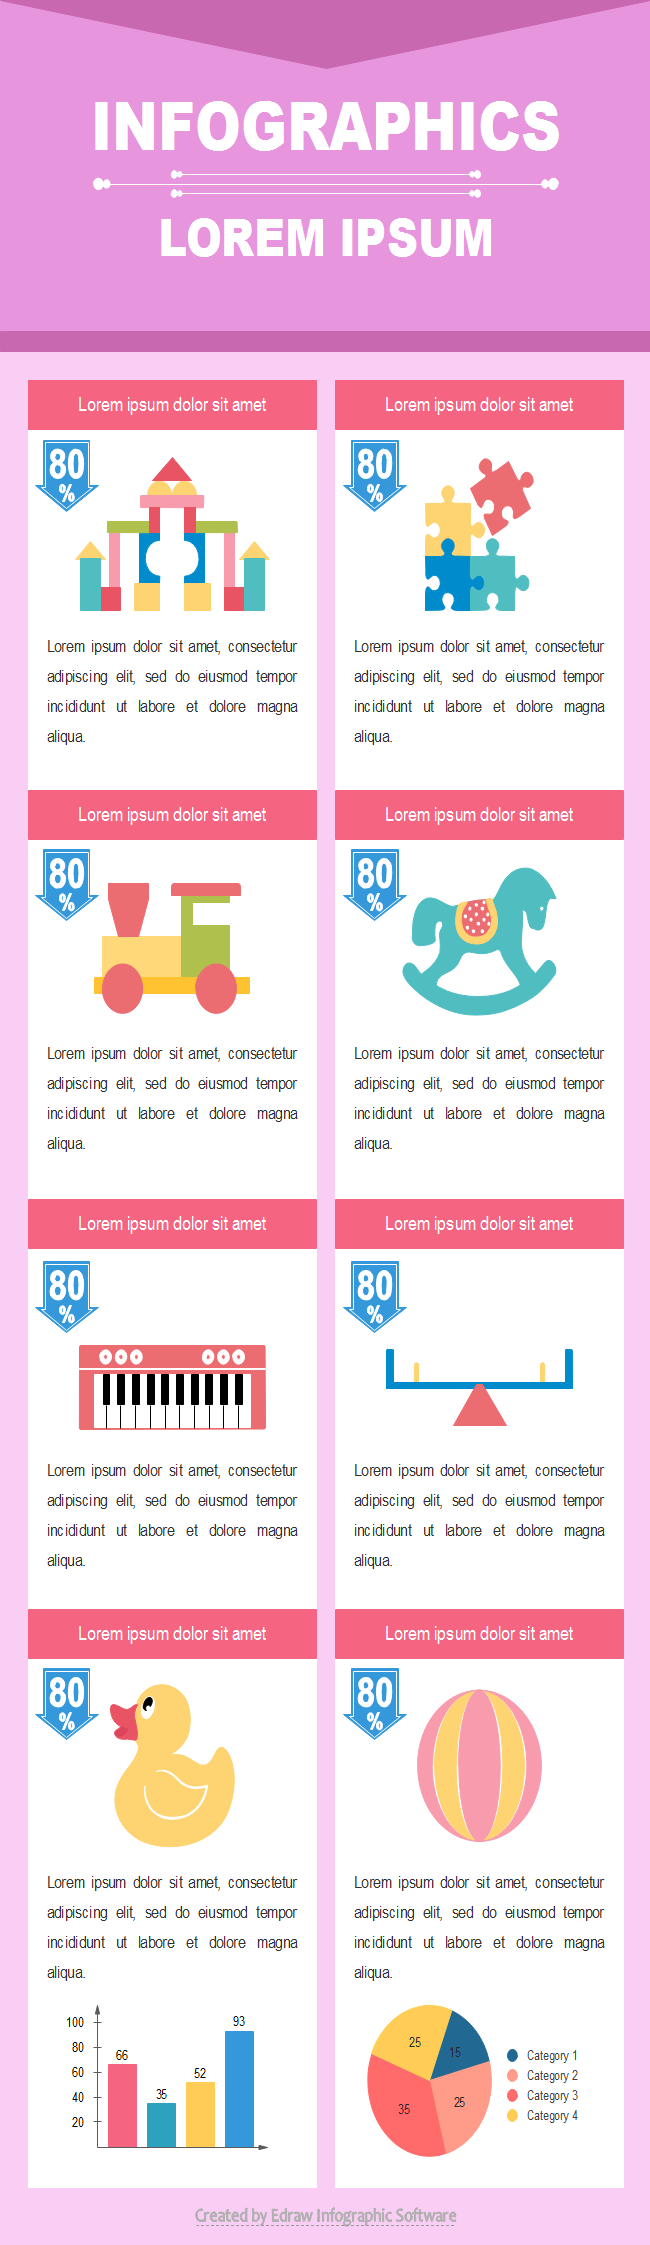 infographic examples for kids